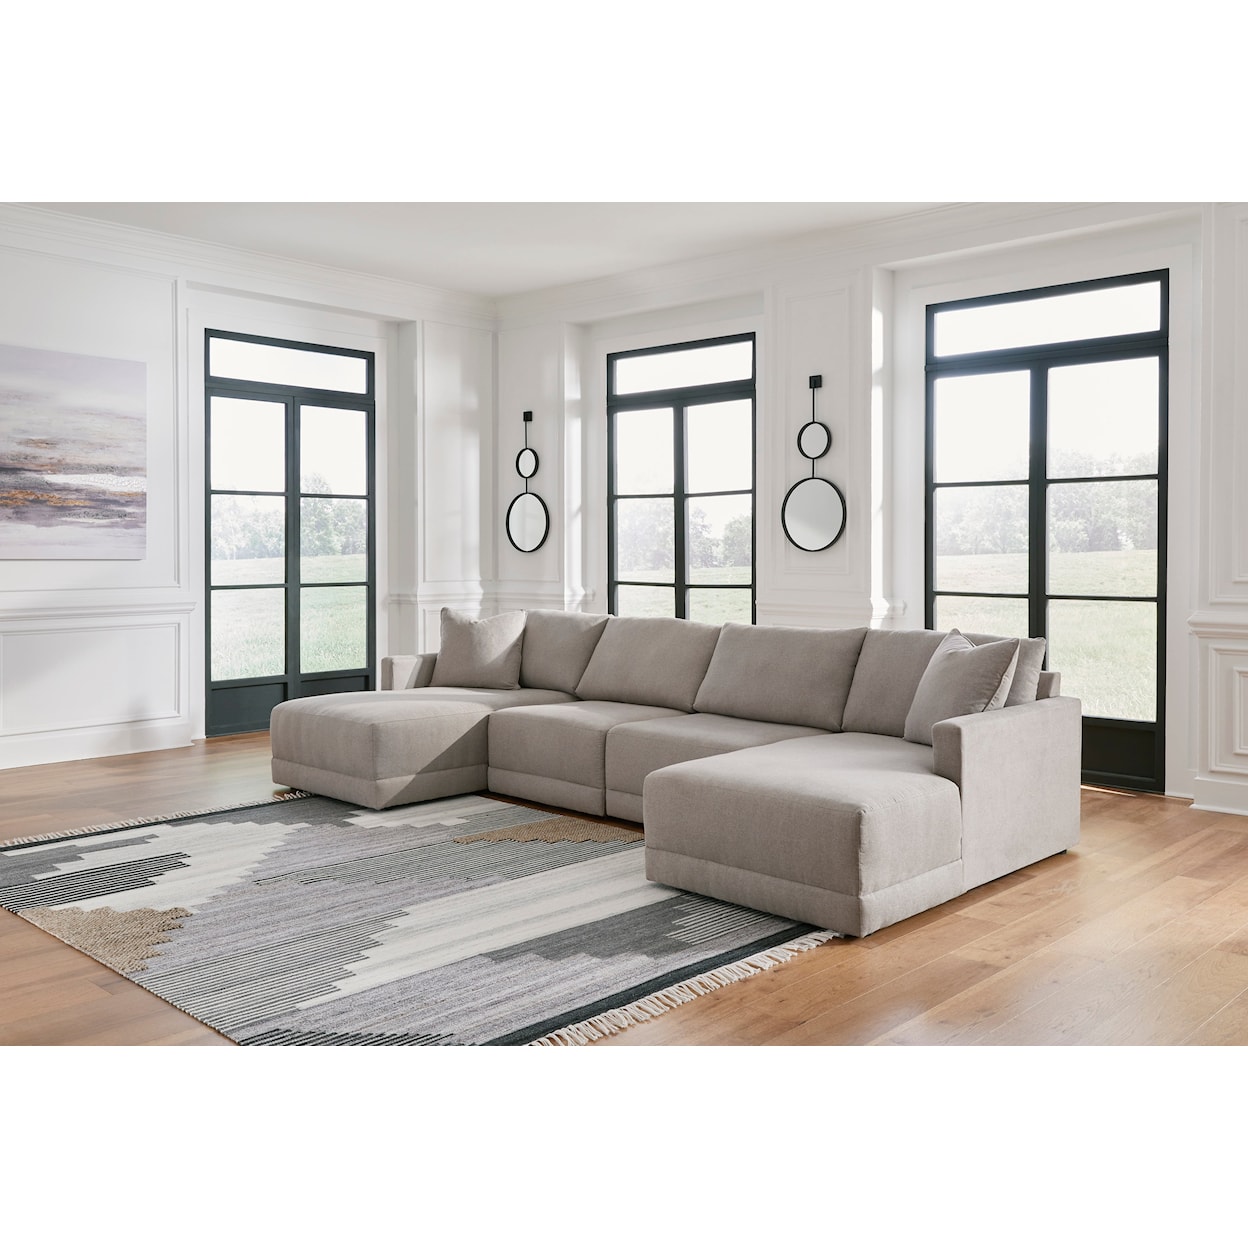 Ashley Furniture Benchcraft Katany Double Chaise Sectional